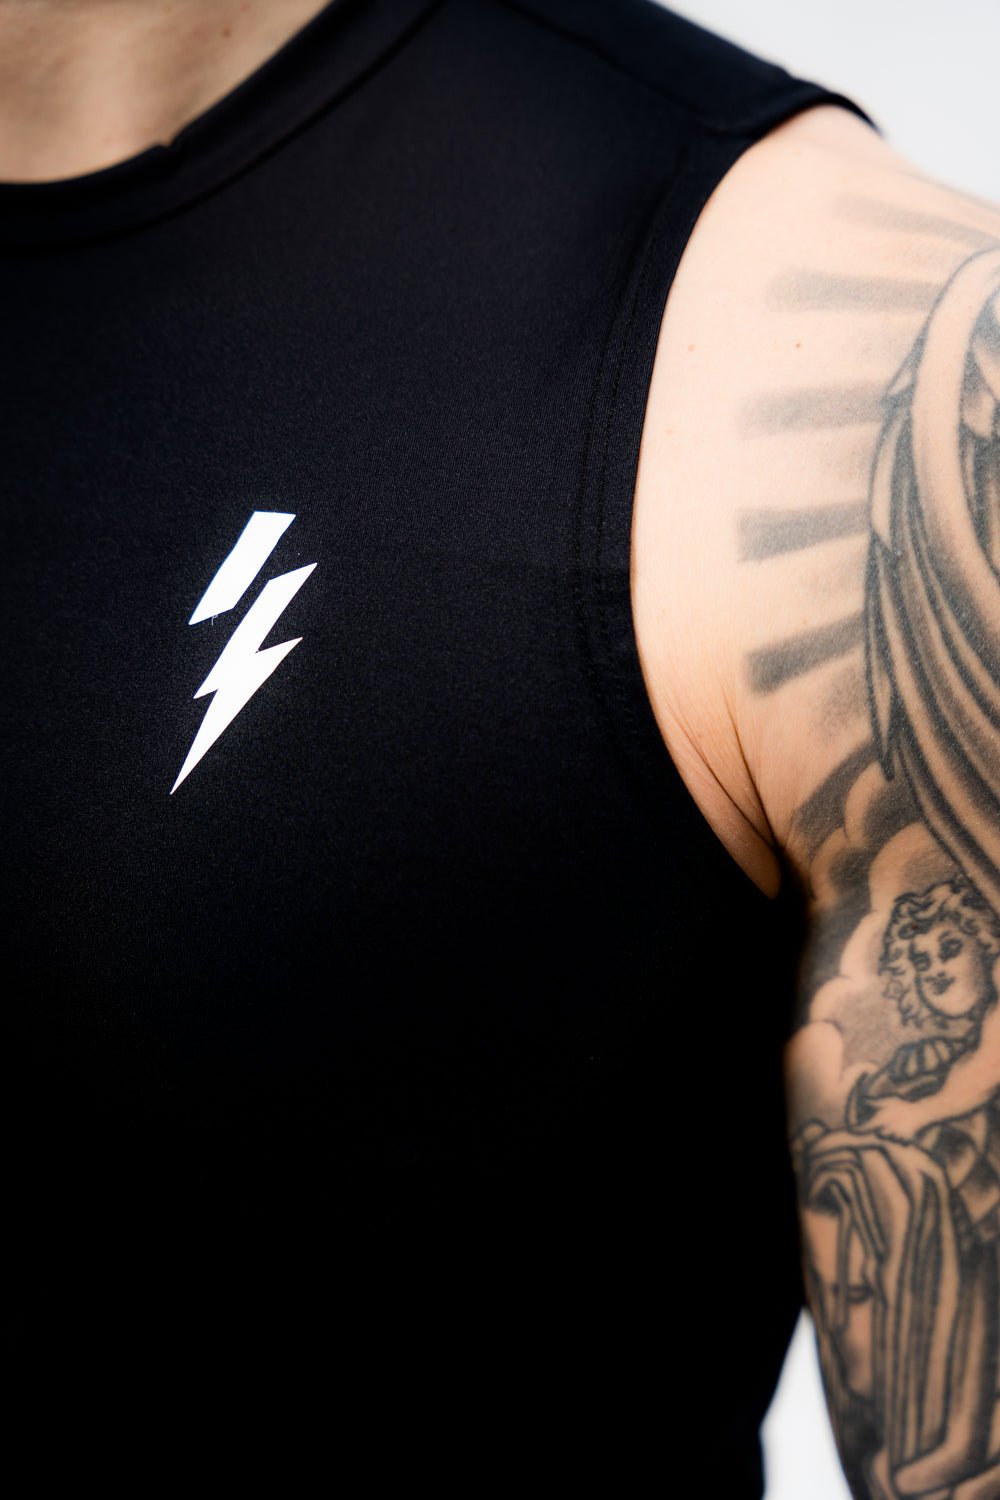 Sleeveless Compression - Tech Recycled